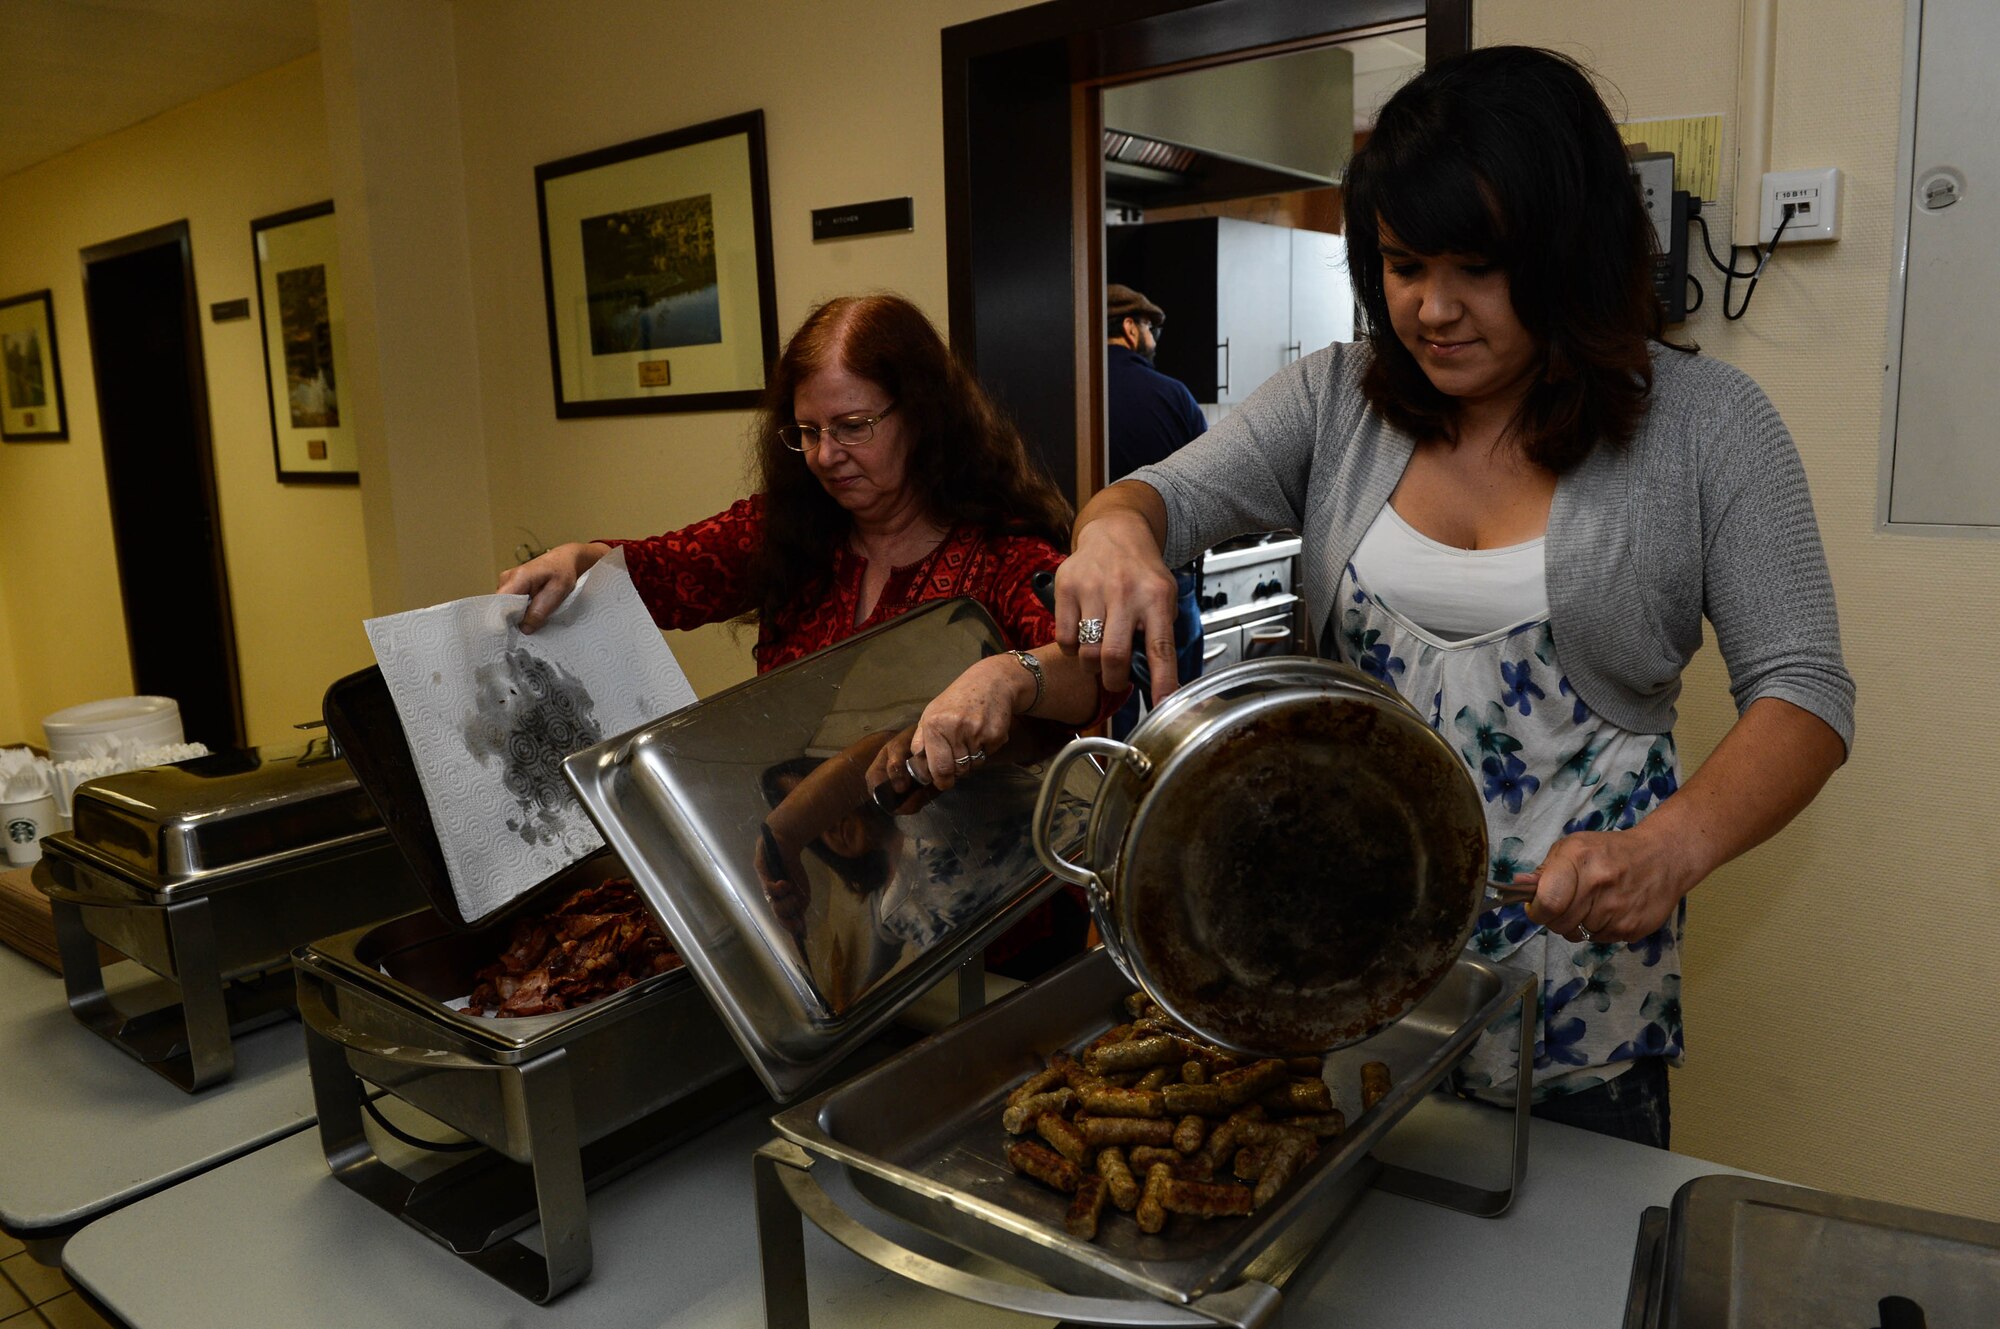 Charlotte Riter, a Geraldine, Mont., native, right, and Judy Castillo, a Phoenix native, left, serve breakfast in the chapel at Spangdahlem Air Base, Germany, Aug. 17, 2014. The Spangdahlem Catholic community hosted the breakfast for families after a religious service. The complimentary meal fed more than 80 people. The chapel provides services for a variety of religious backgrounds. (U.S. Air Force photo by Airman 1st Class Kyle Gese/Released)